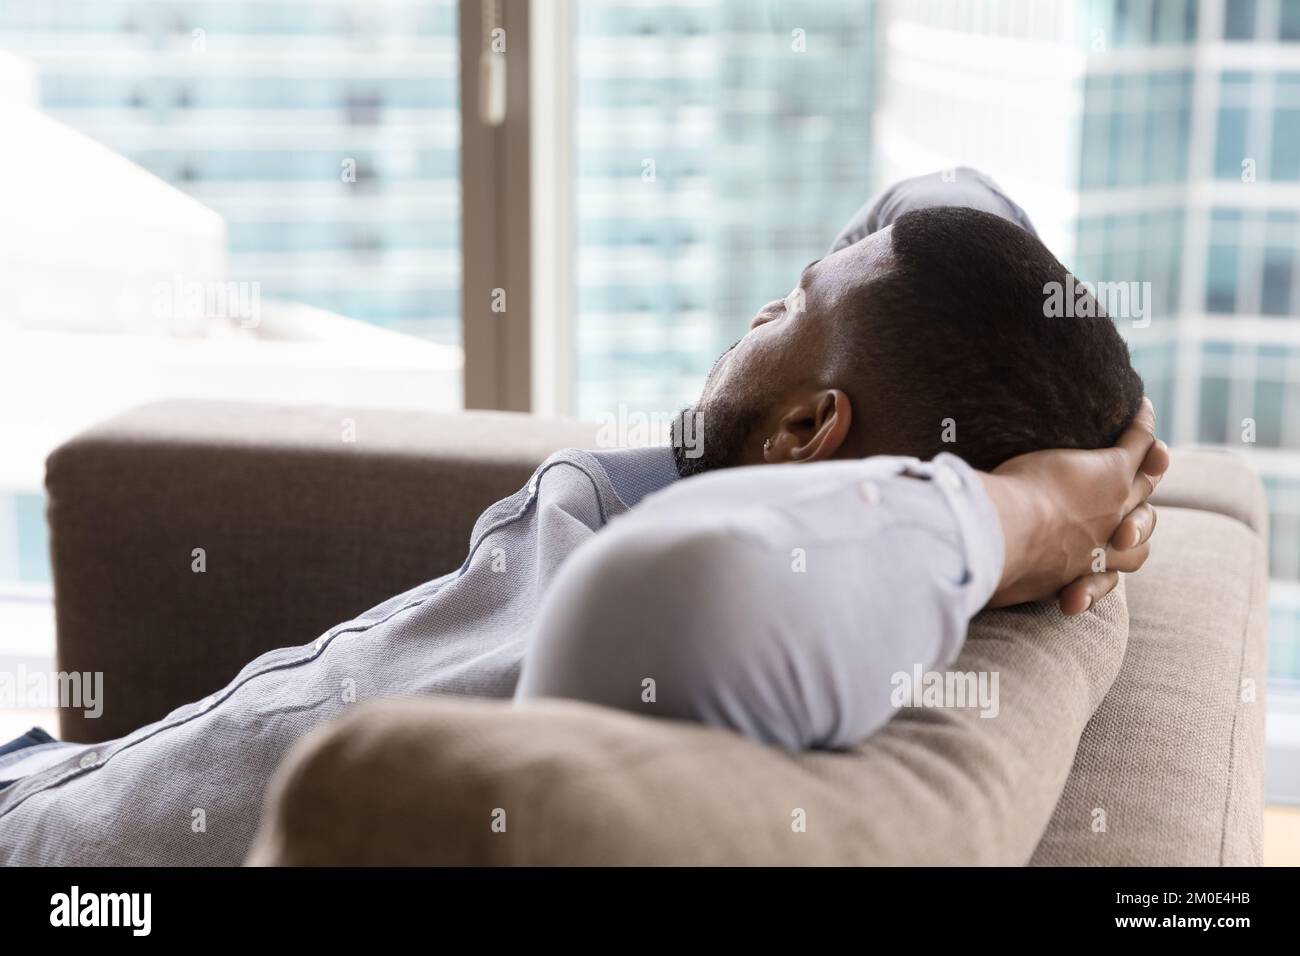 Dreamy sleepy young Black man relaxing on couch Stock Photo